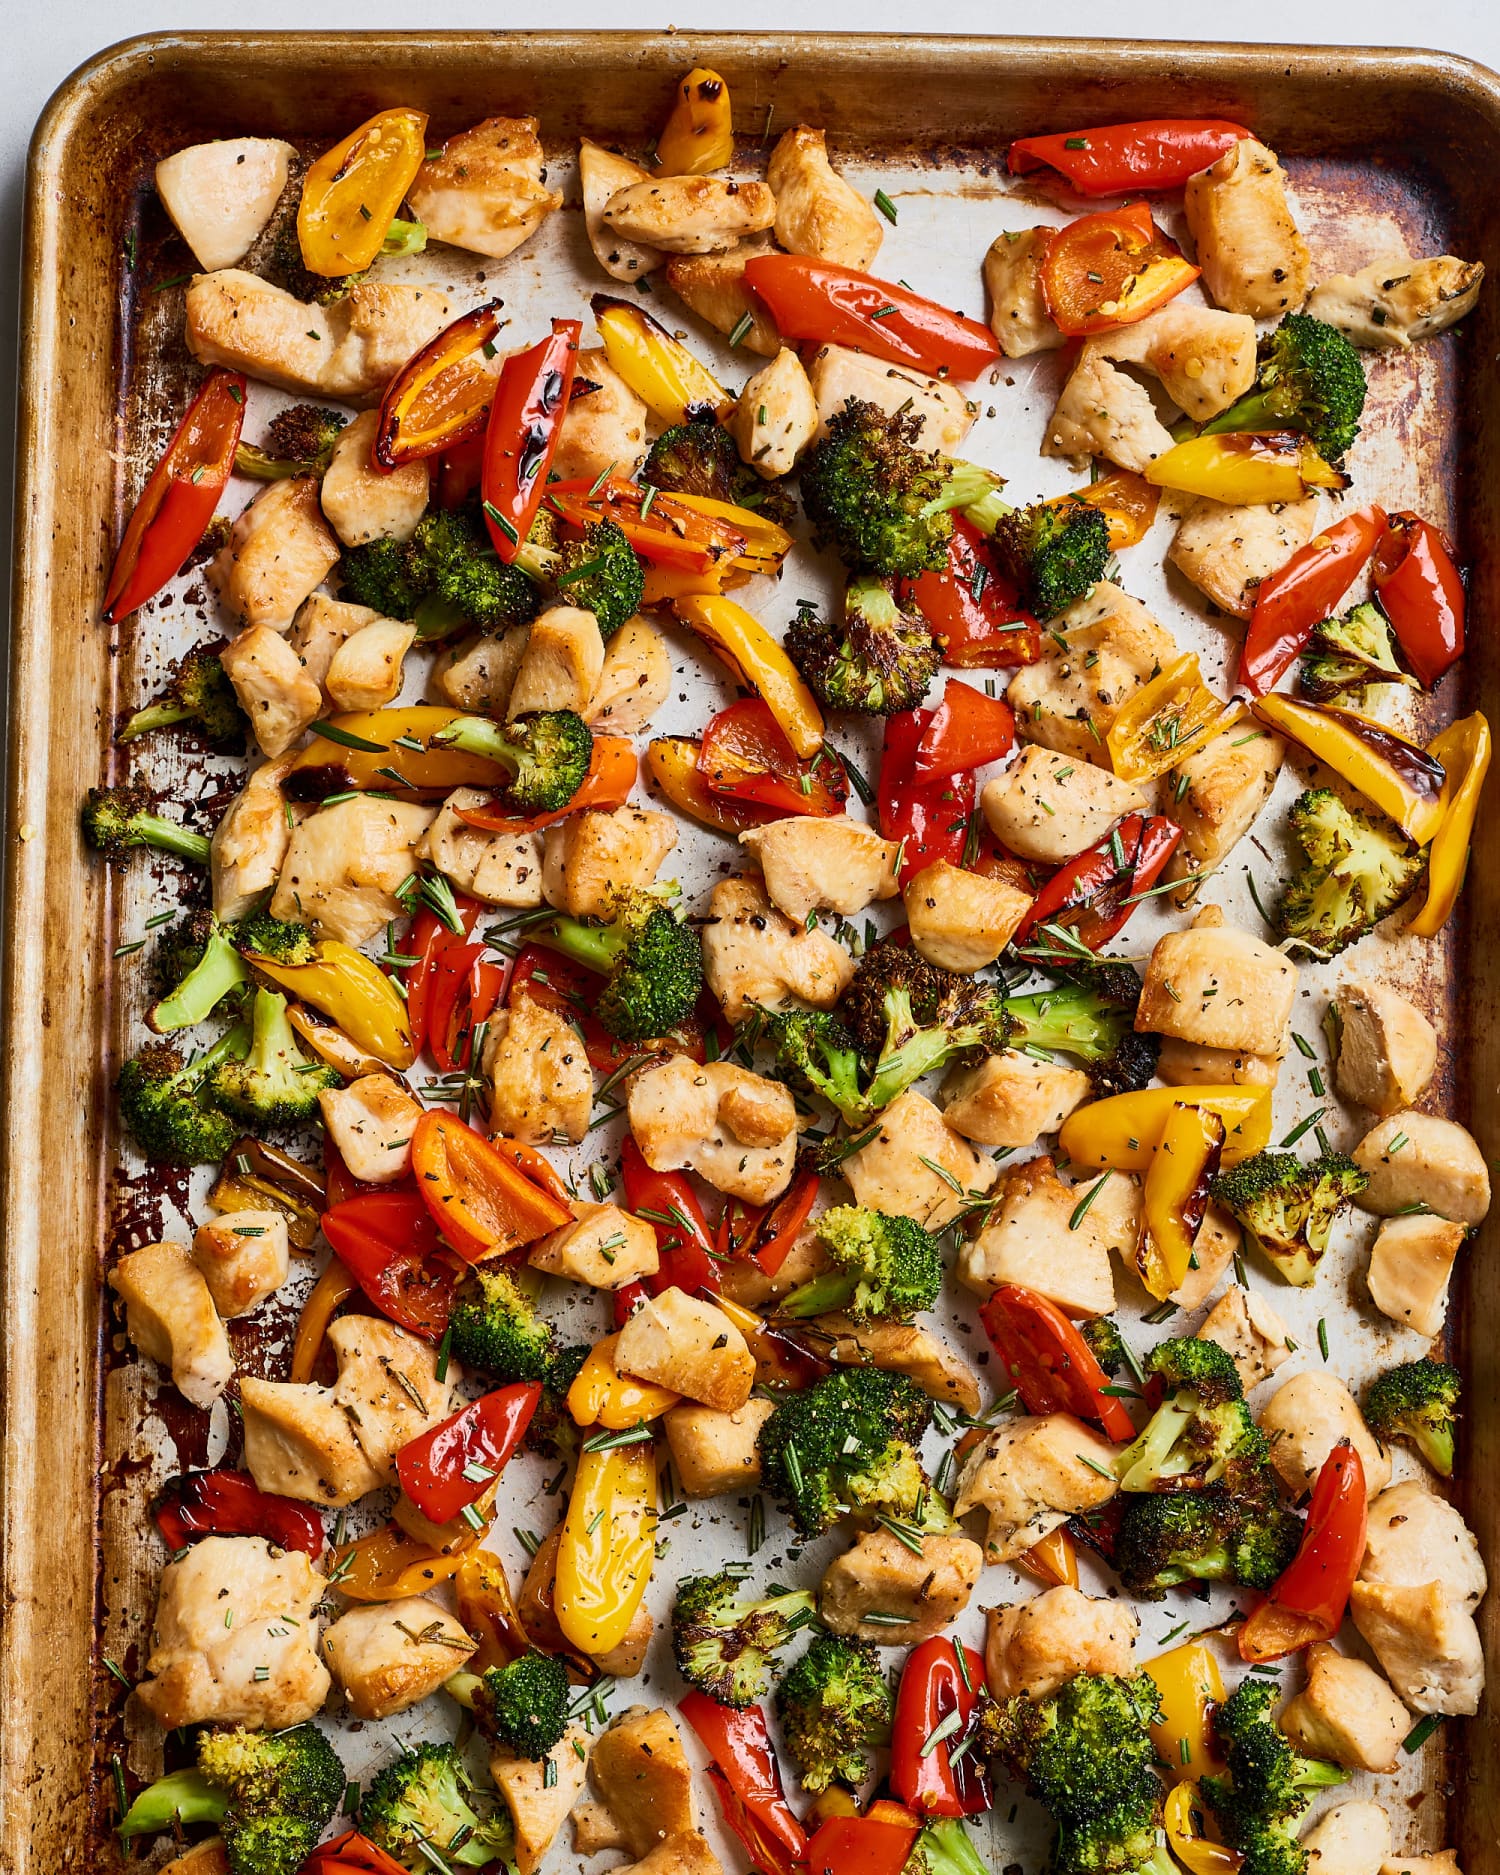 13 Ultra-Easy Baked Chicken Recipes That Work Great for Meal Prep